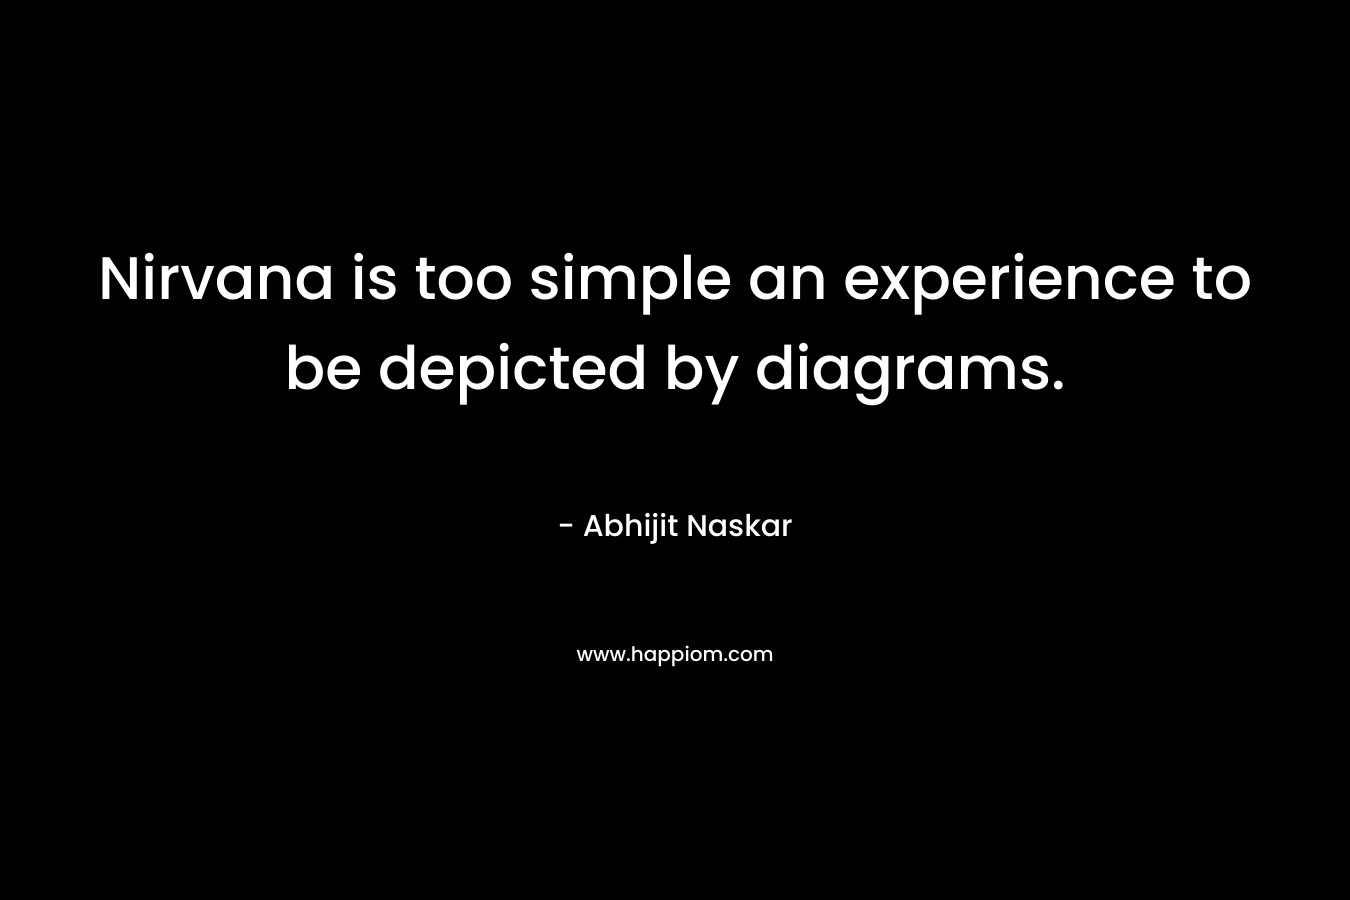 Nirvana is too simple an experience to be depicted by diagrams.